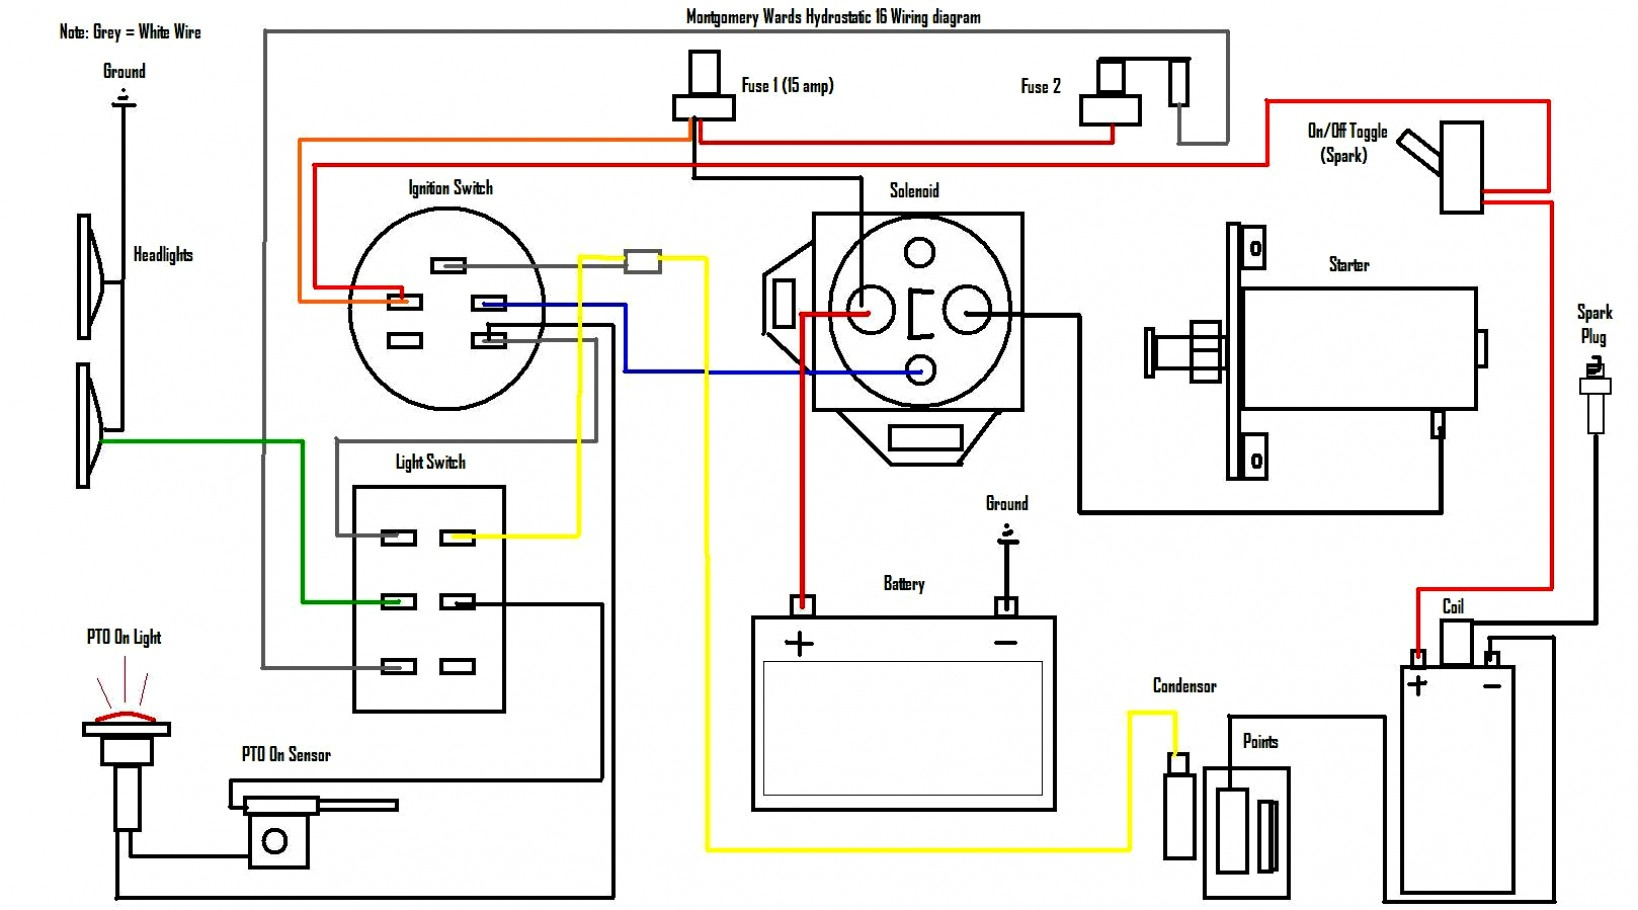 12 Hp Briggs And Stratton Wiring Diagram | Wiring Diagram - Briggs And Stratton Wiring Diagram 16 Hp